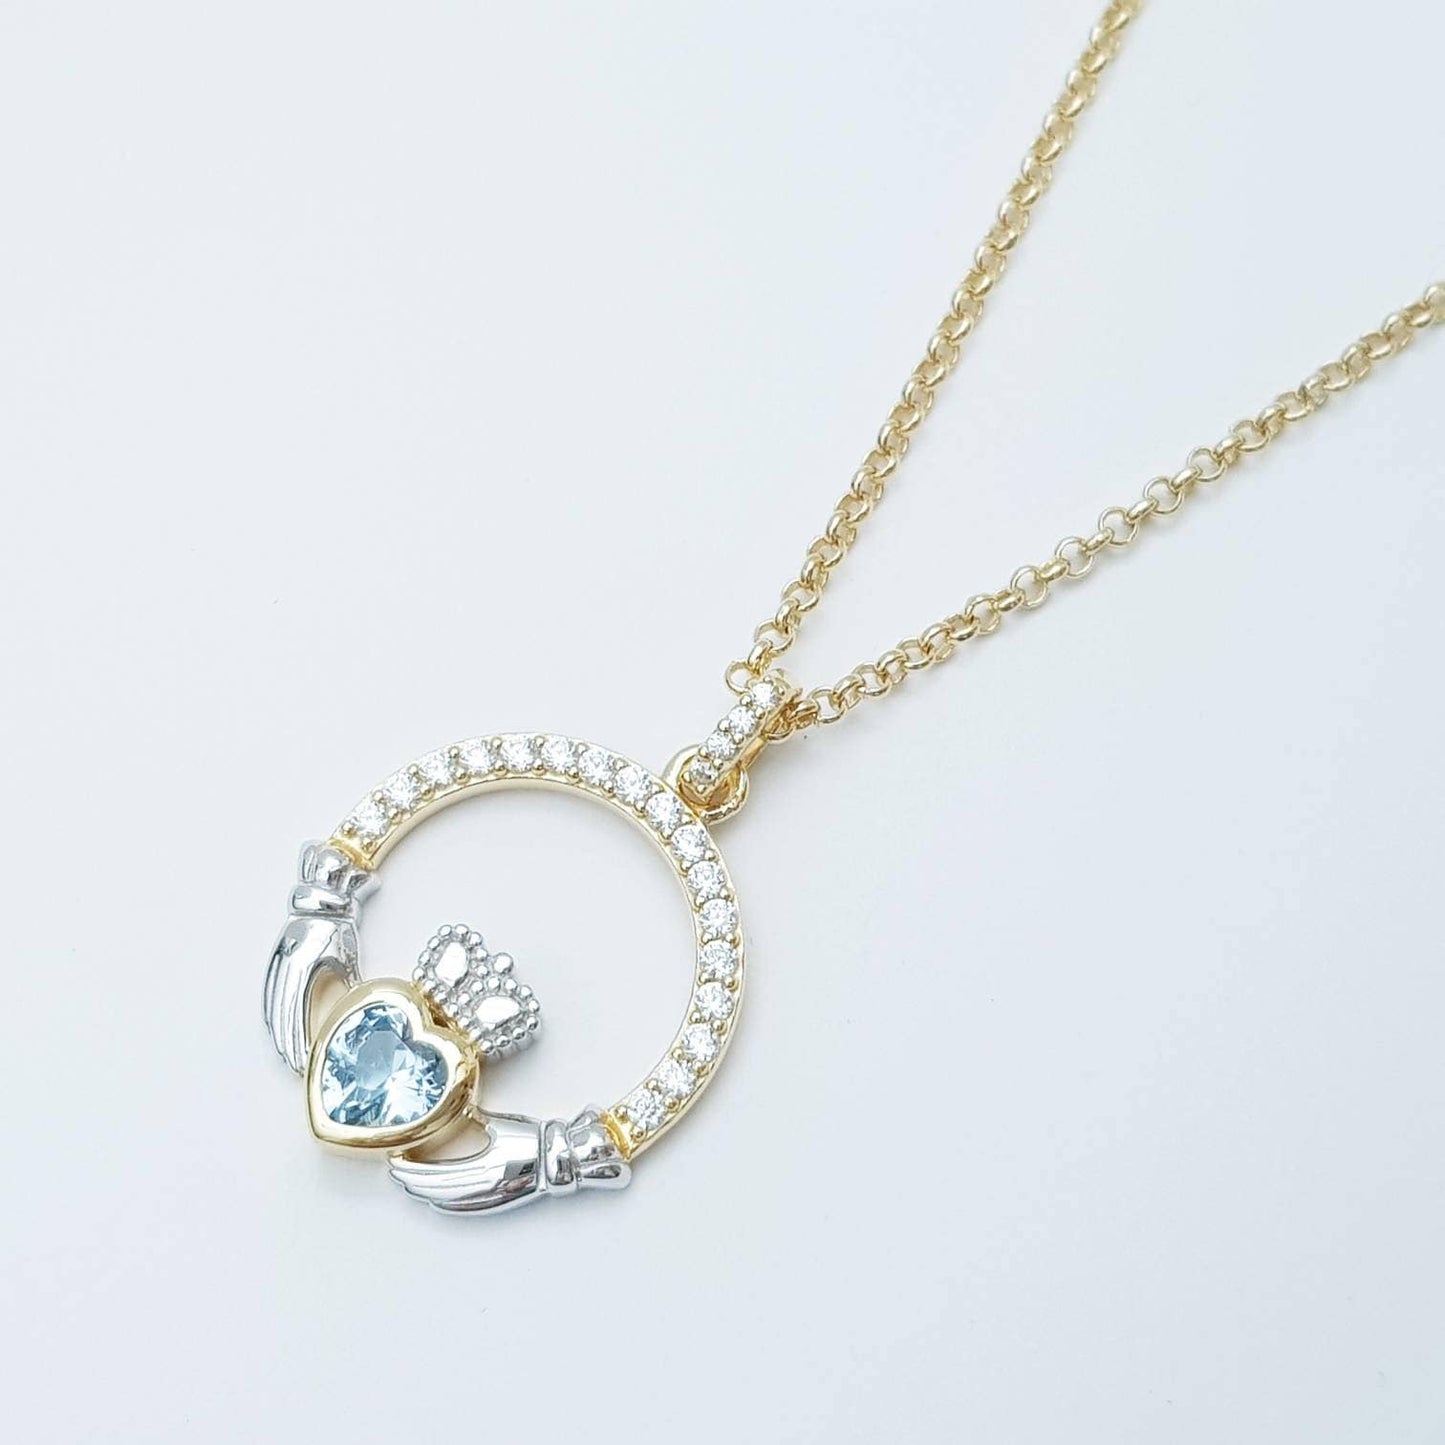 Silver and gold claddagh pendant with Aquamarine blue stone